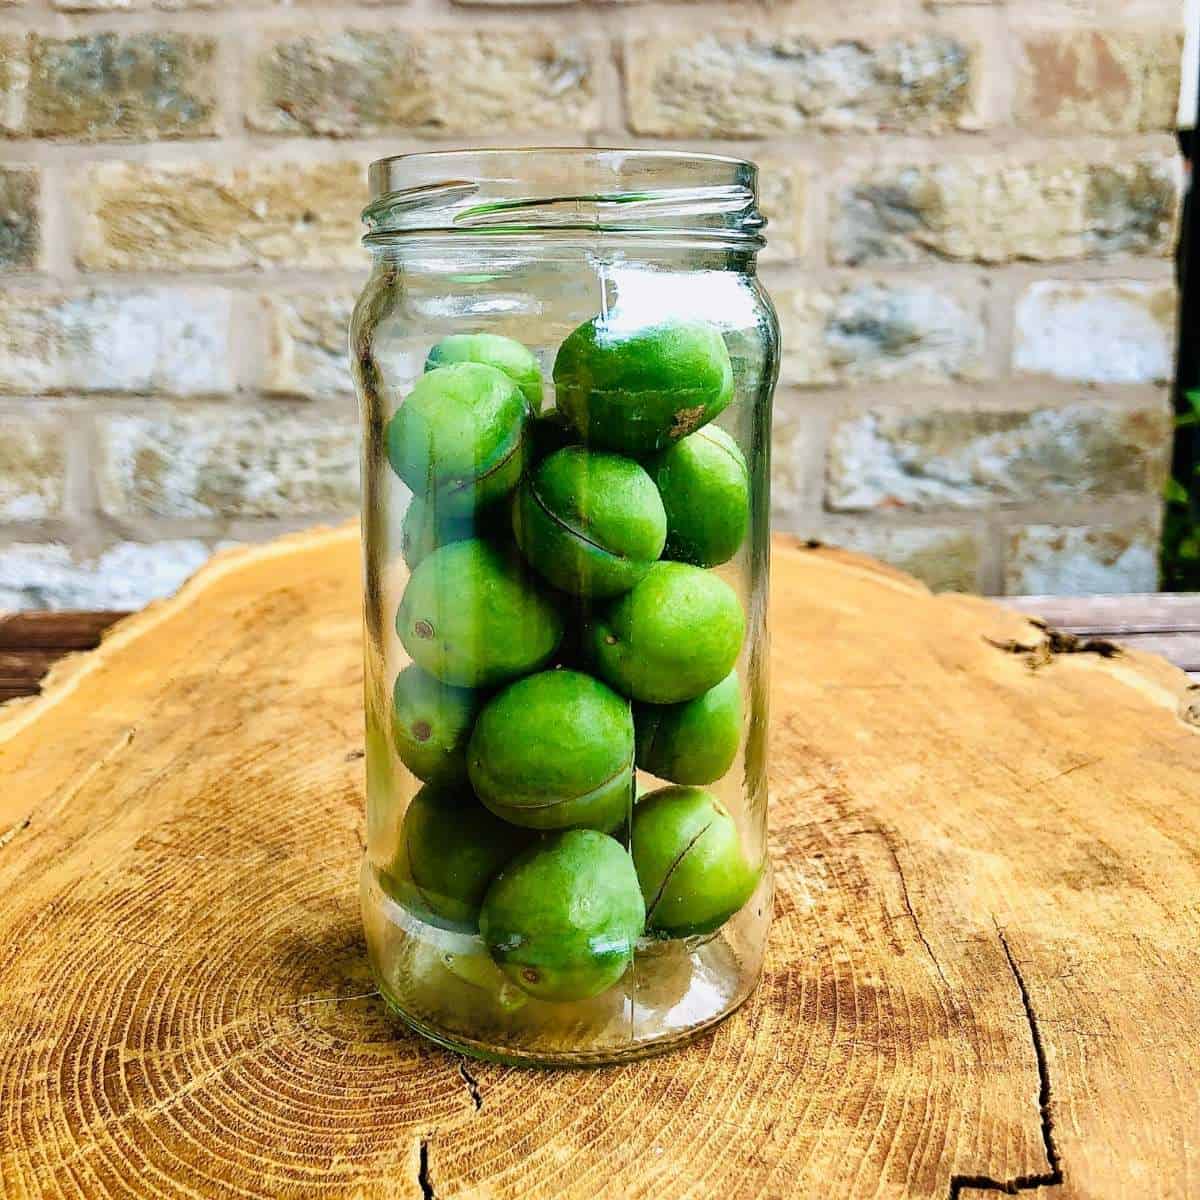 Close up of a jar containing tightly packed in unripe plums